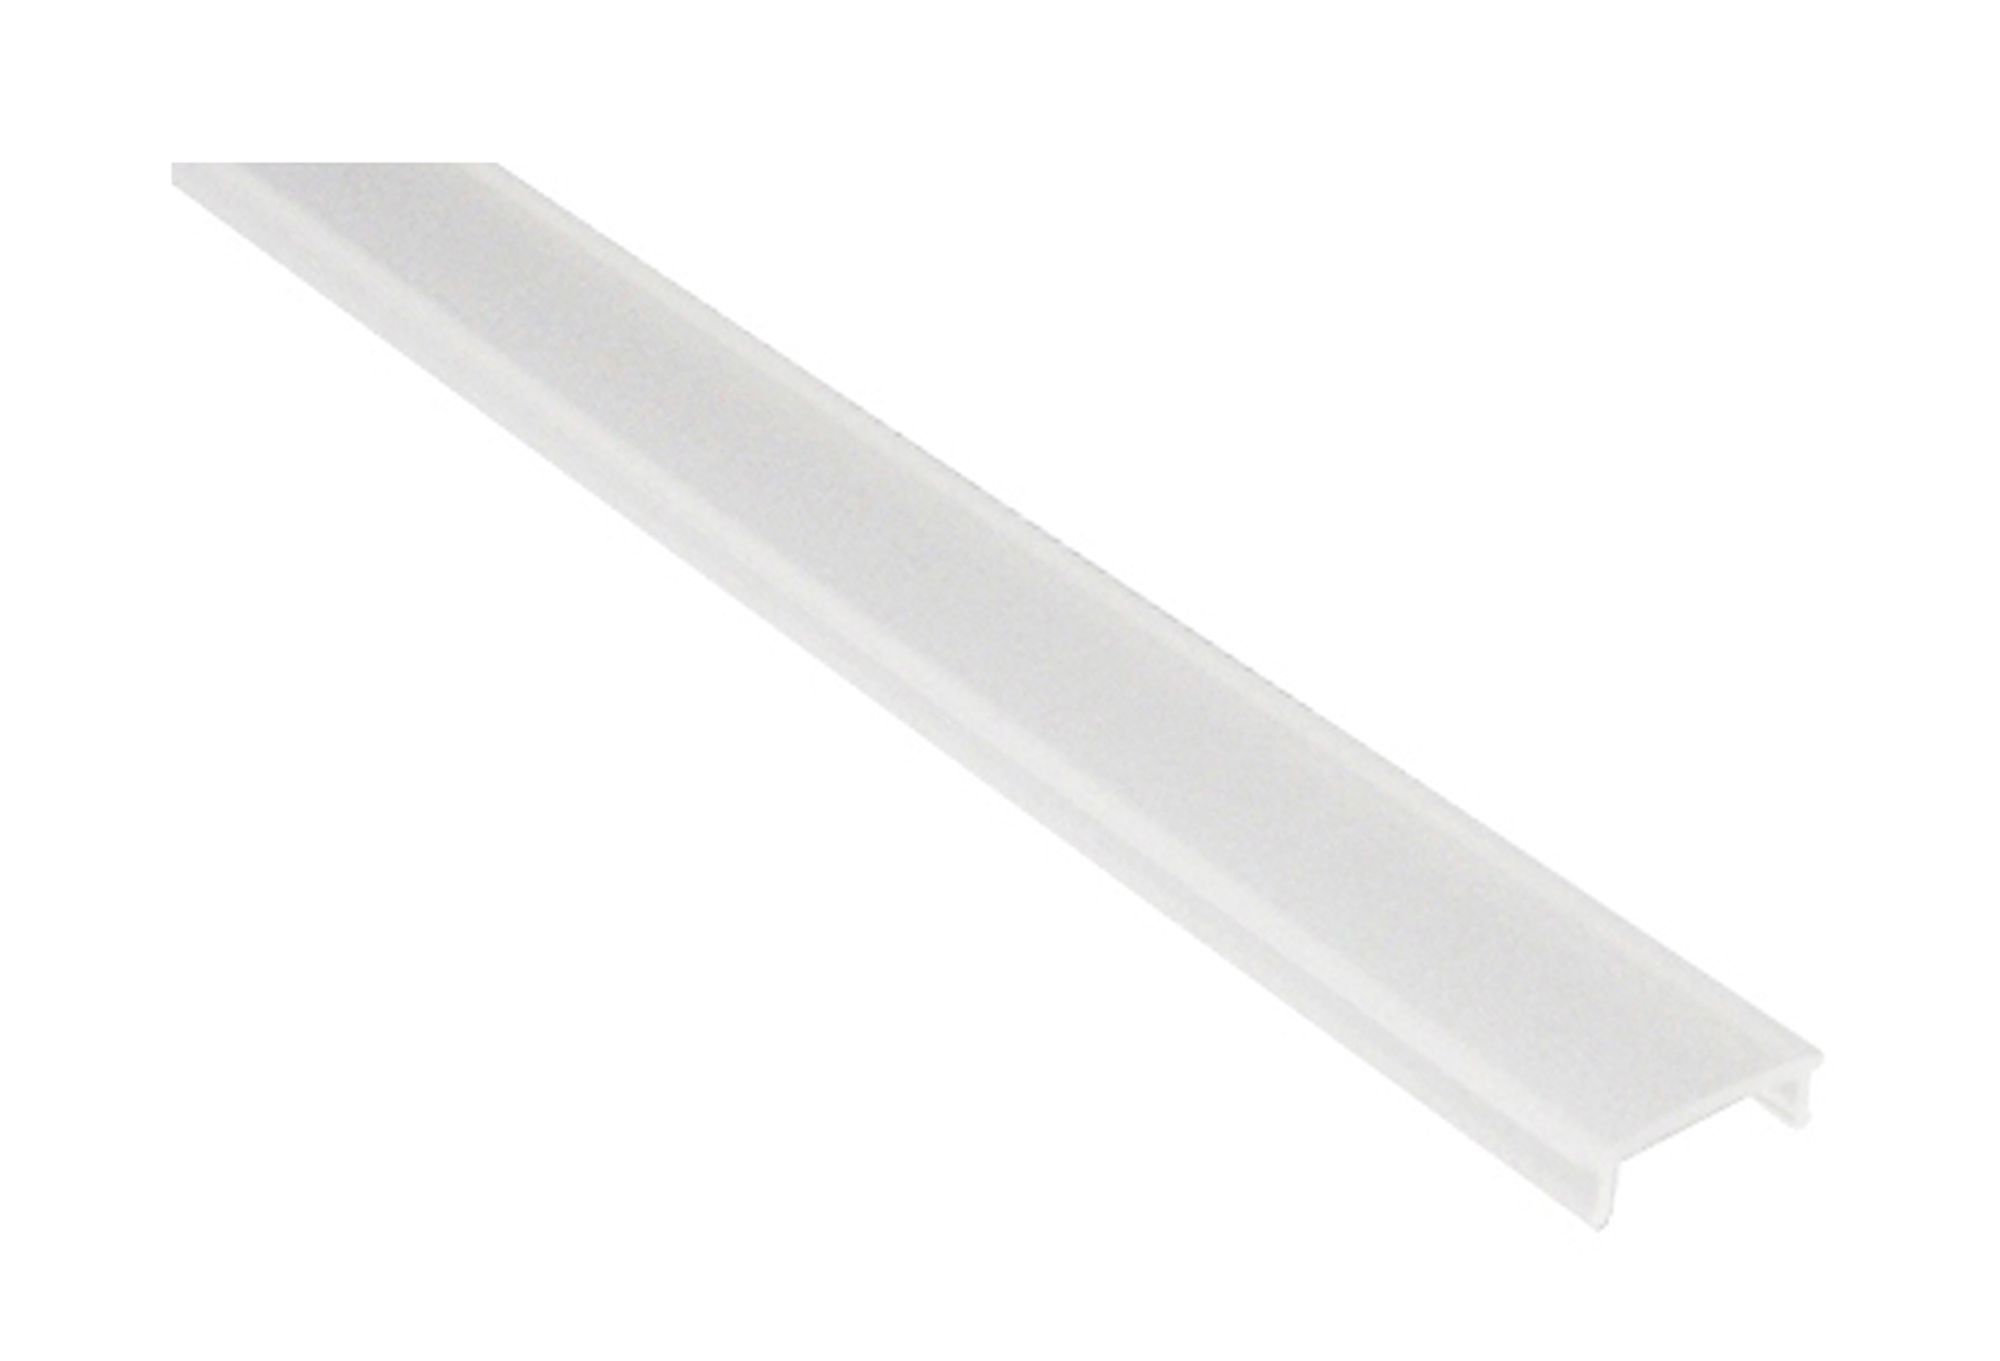 DA910044  Lin 4918W, 2m Flat Frosted Diffuser Cover For DA900033 15mm Wide 85% Transmittance